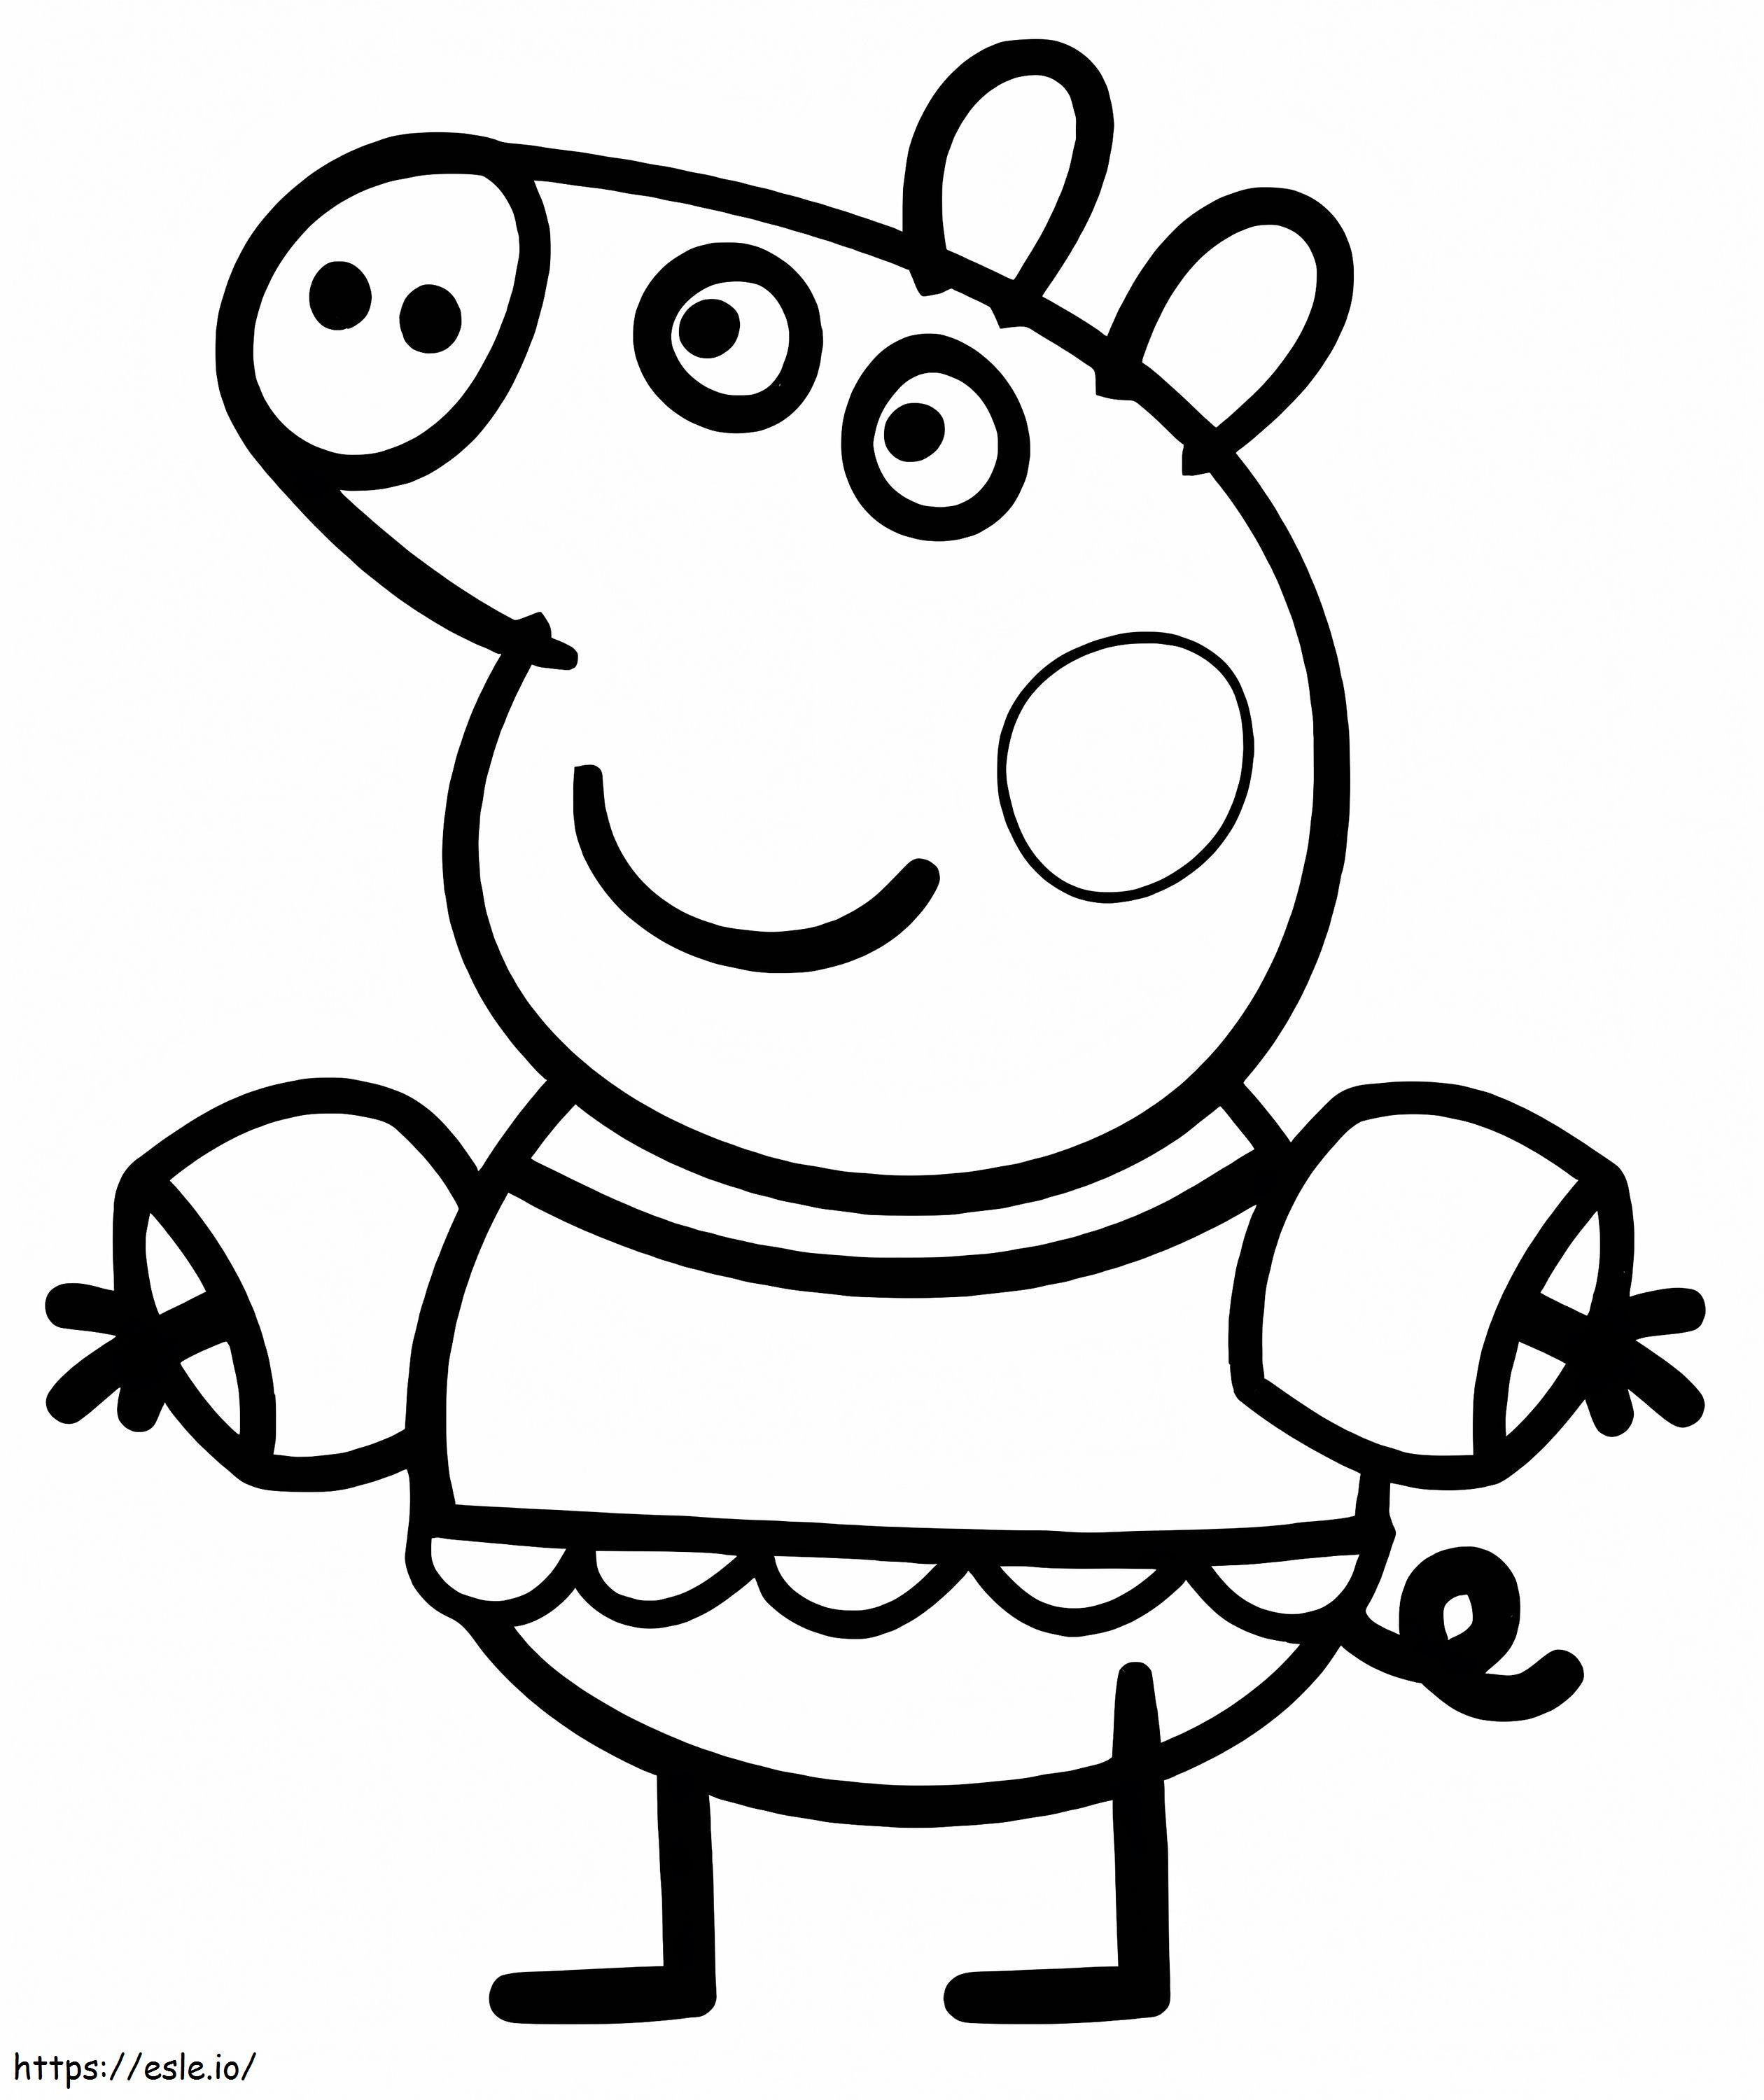 1580803219 Peppa Pig Images For Coloring 860X1024 1 coloring page